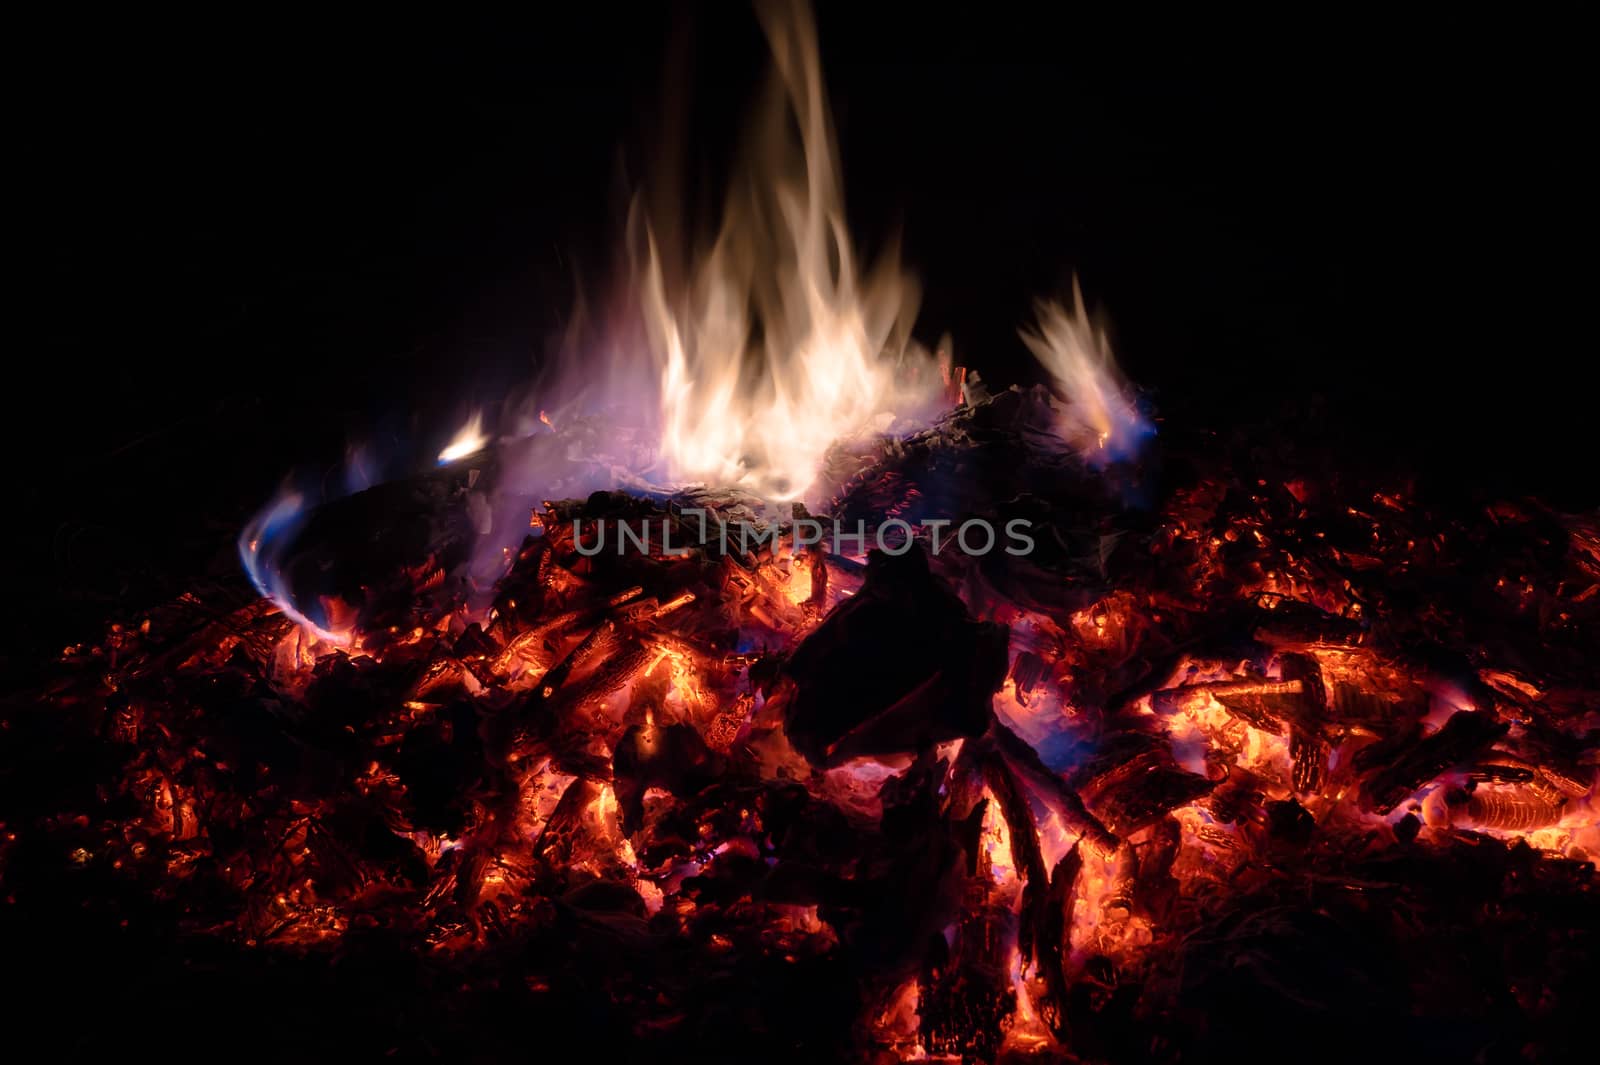 A low light long exposure photo of smouldering coals. by alexsdriver